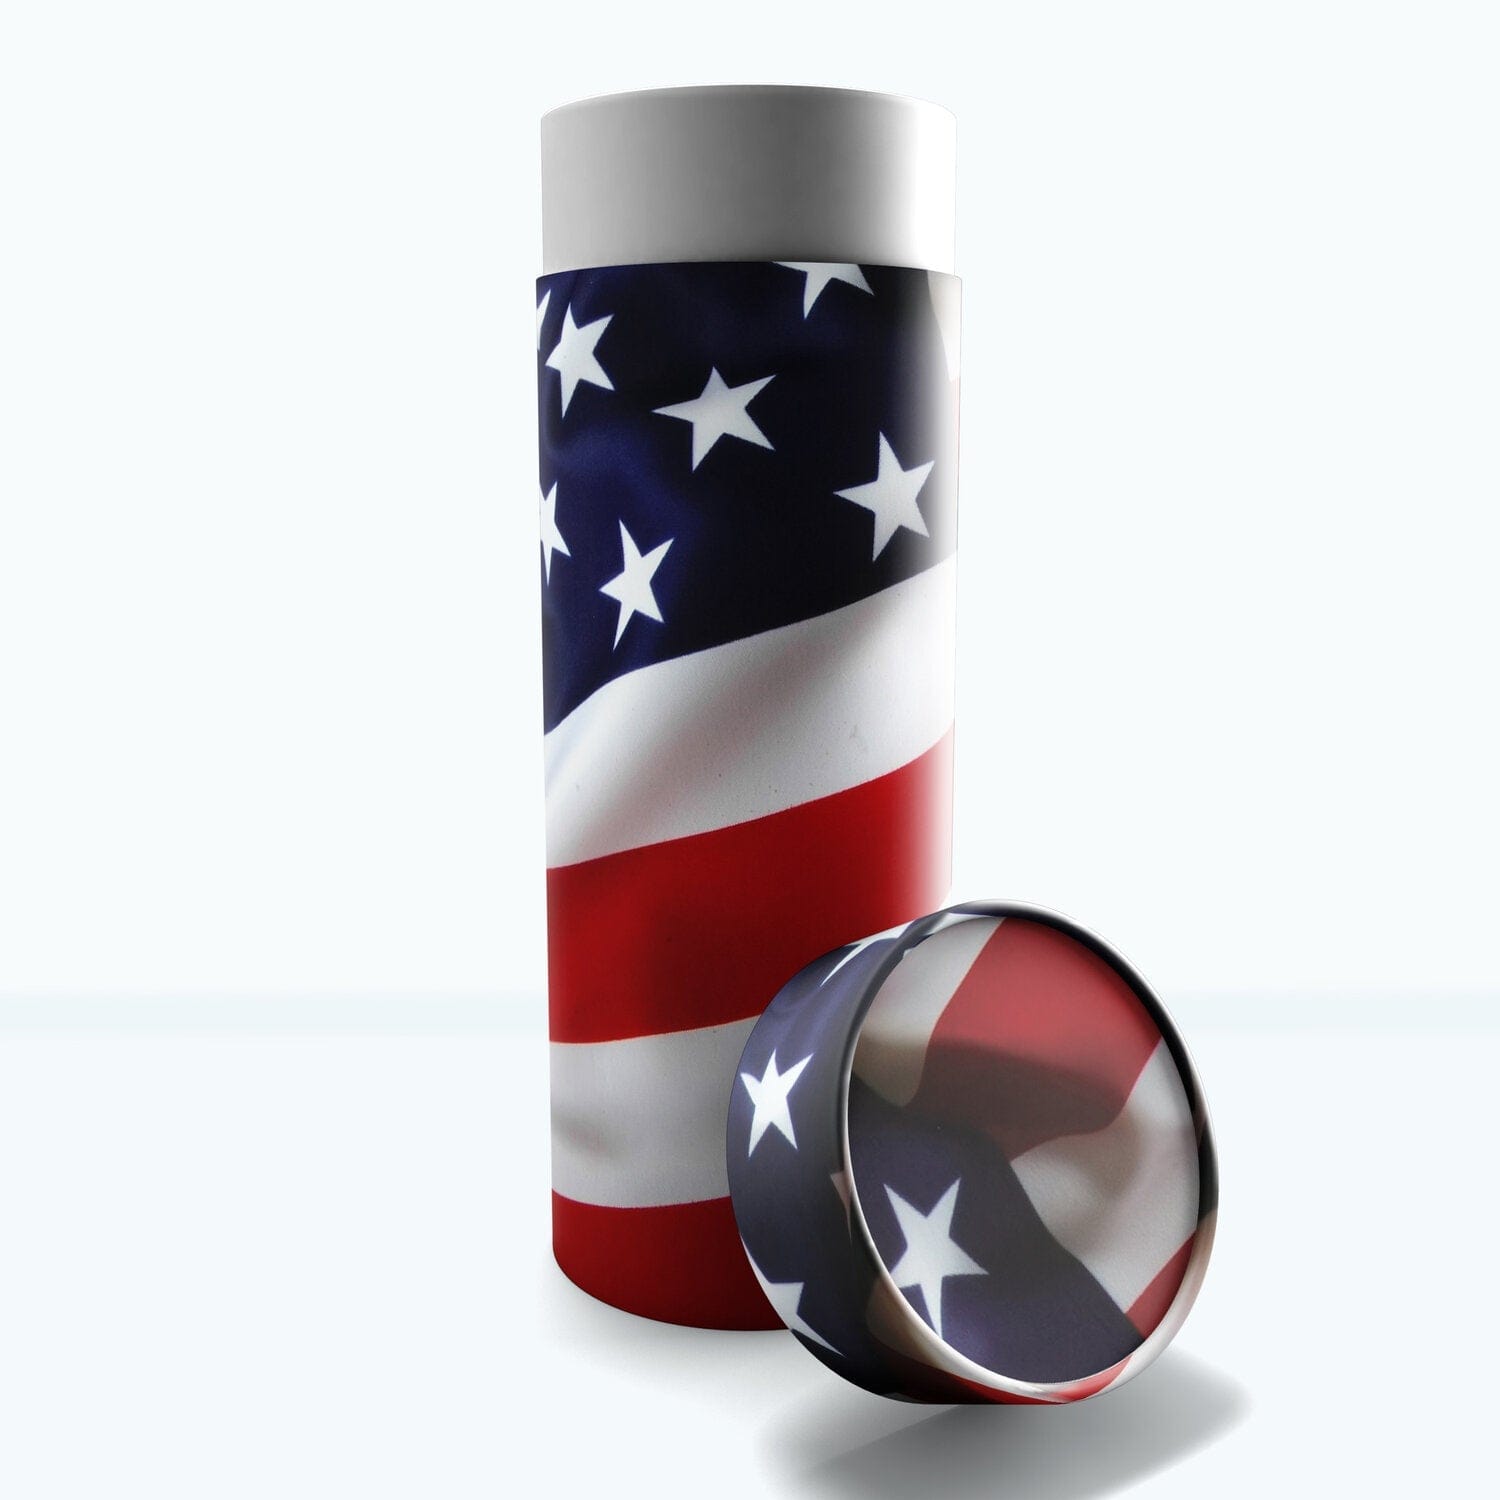 Commemorative Cremation Urns LARGE  12 x 5 - Holds up to 230 cubic inches American Flag - Biodegradable & Eco Friendly Burial or Scattering Urn / Tube